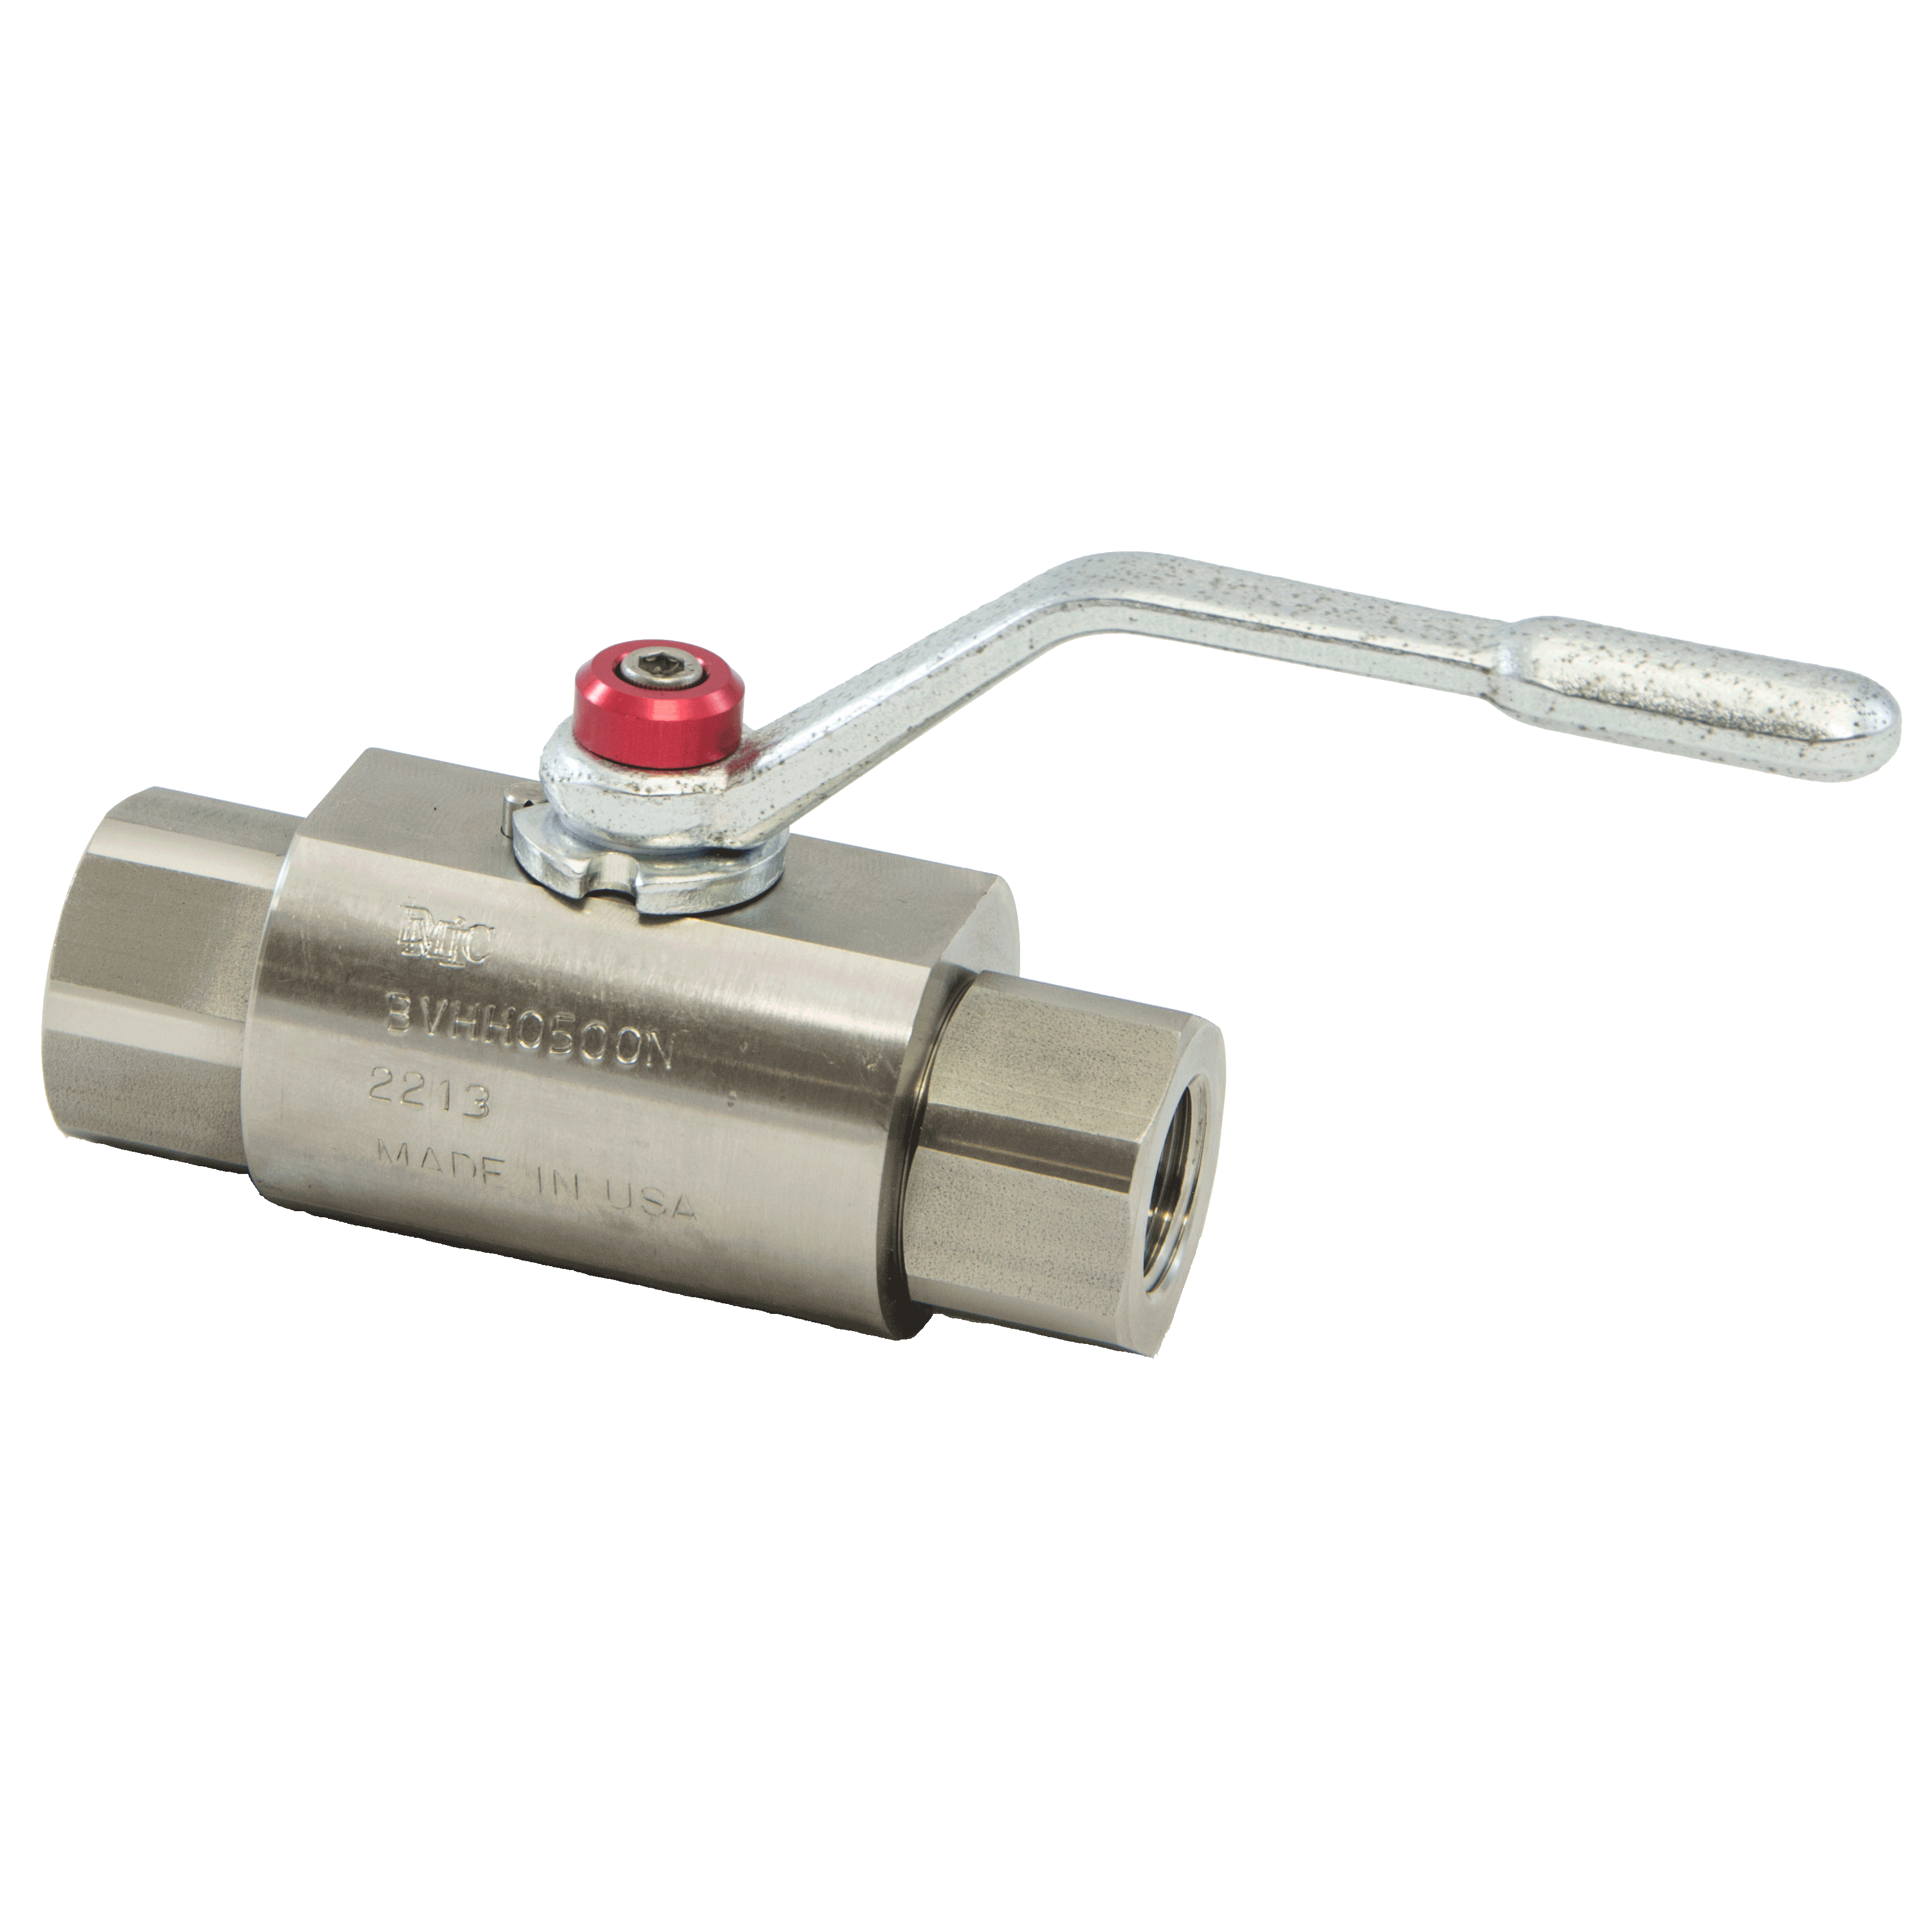 BVHH-2000S-2211 : DMIC Super High Pressure Ball Valve, #32 SAE (2), 316 Stainless Steel, 10000psi, Two-Way